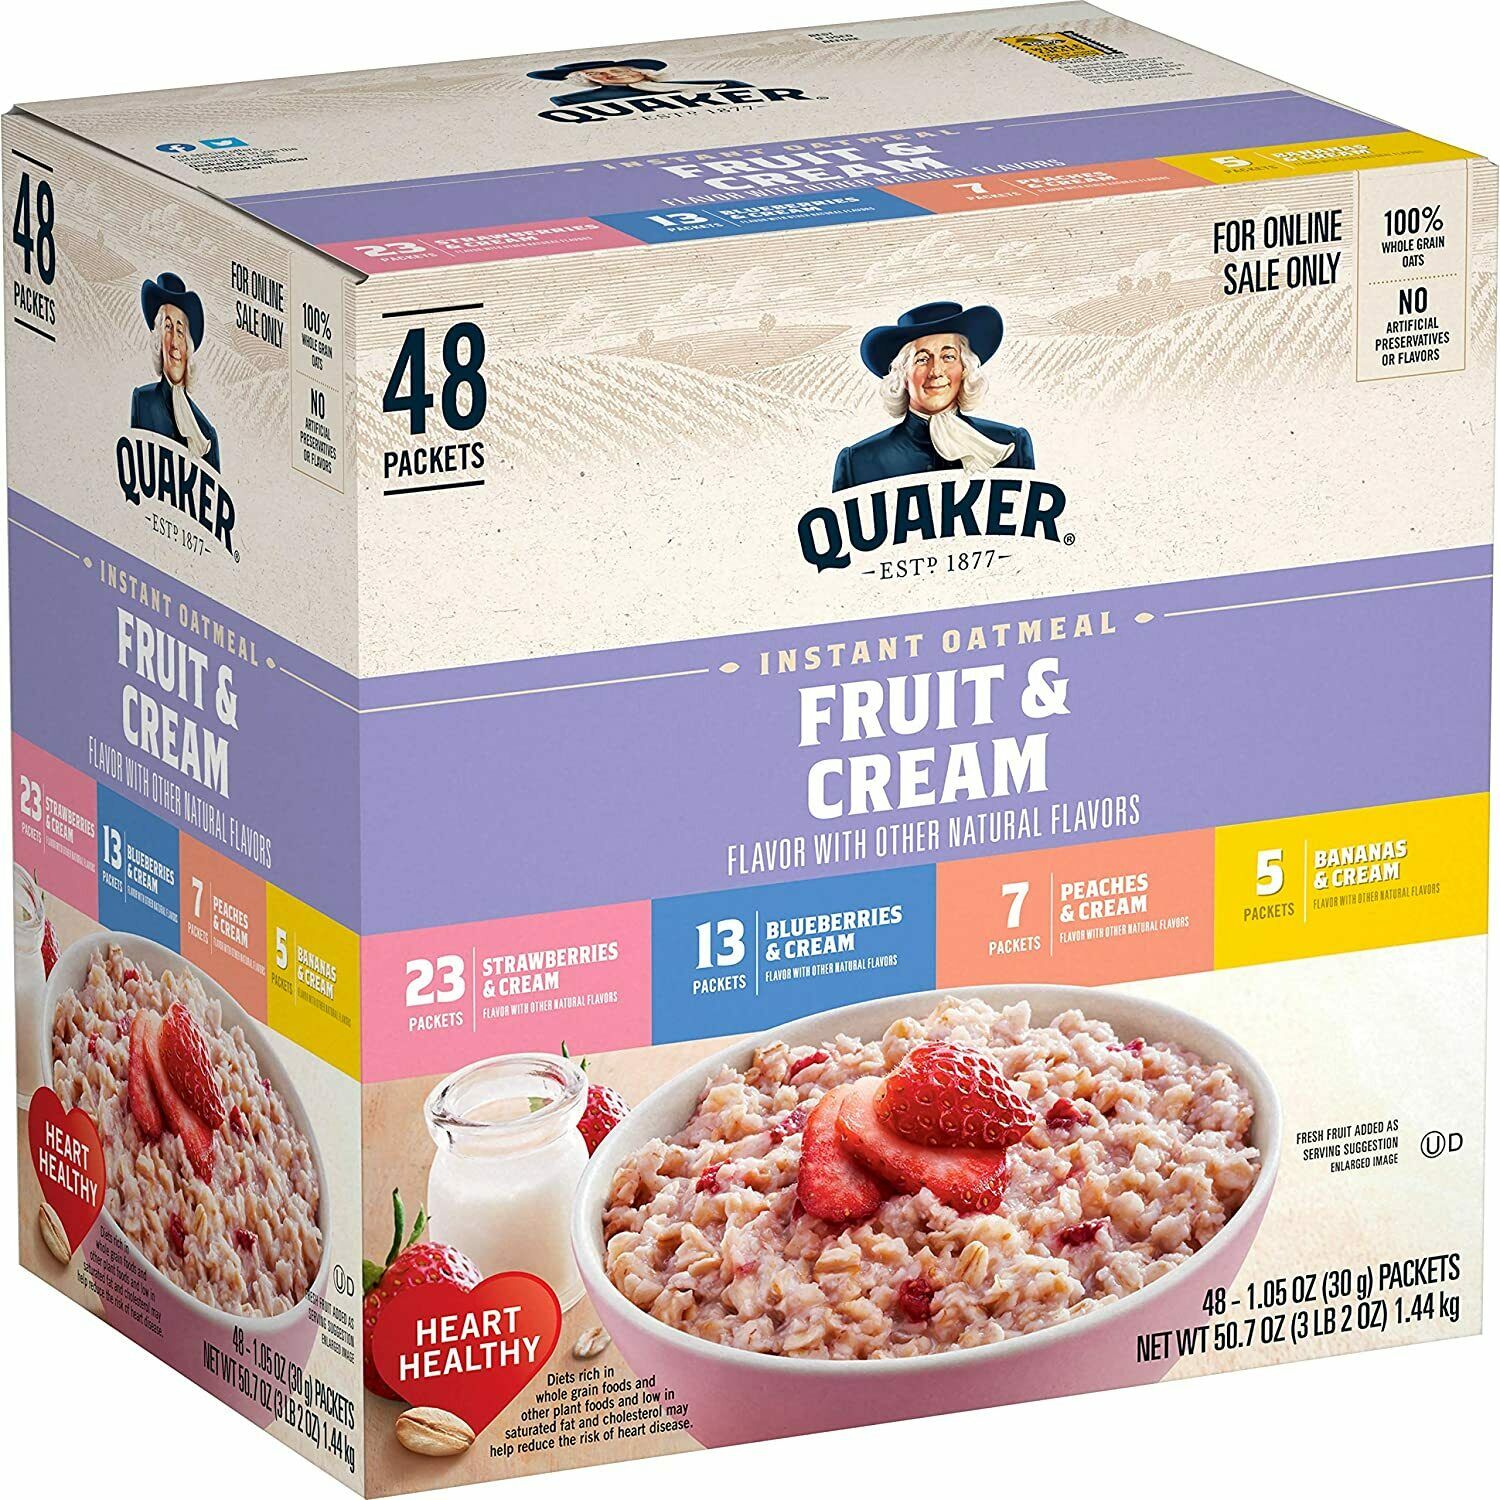 Quaker Instant Oatmeal, Fruit And Cream 4 Flavor Variety Pack,48 Count